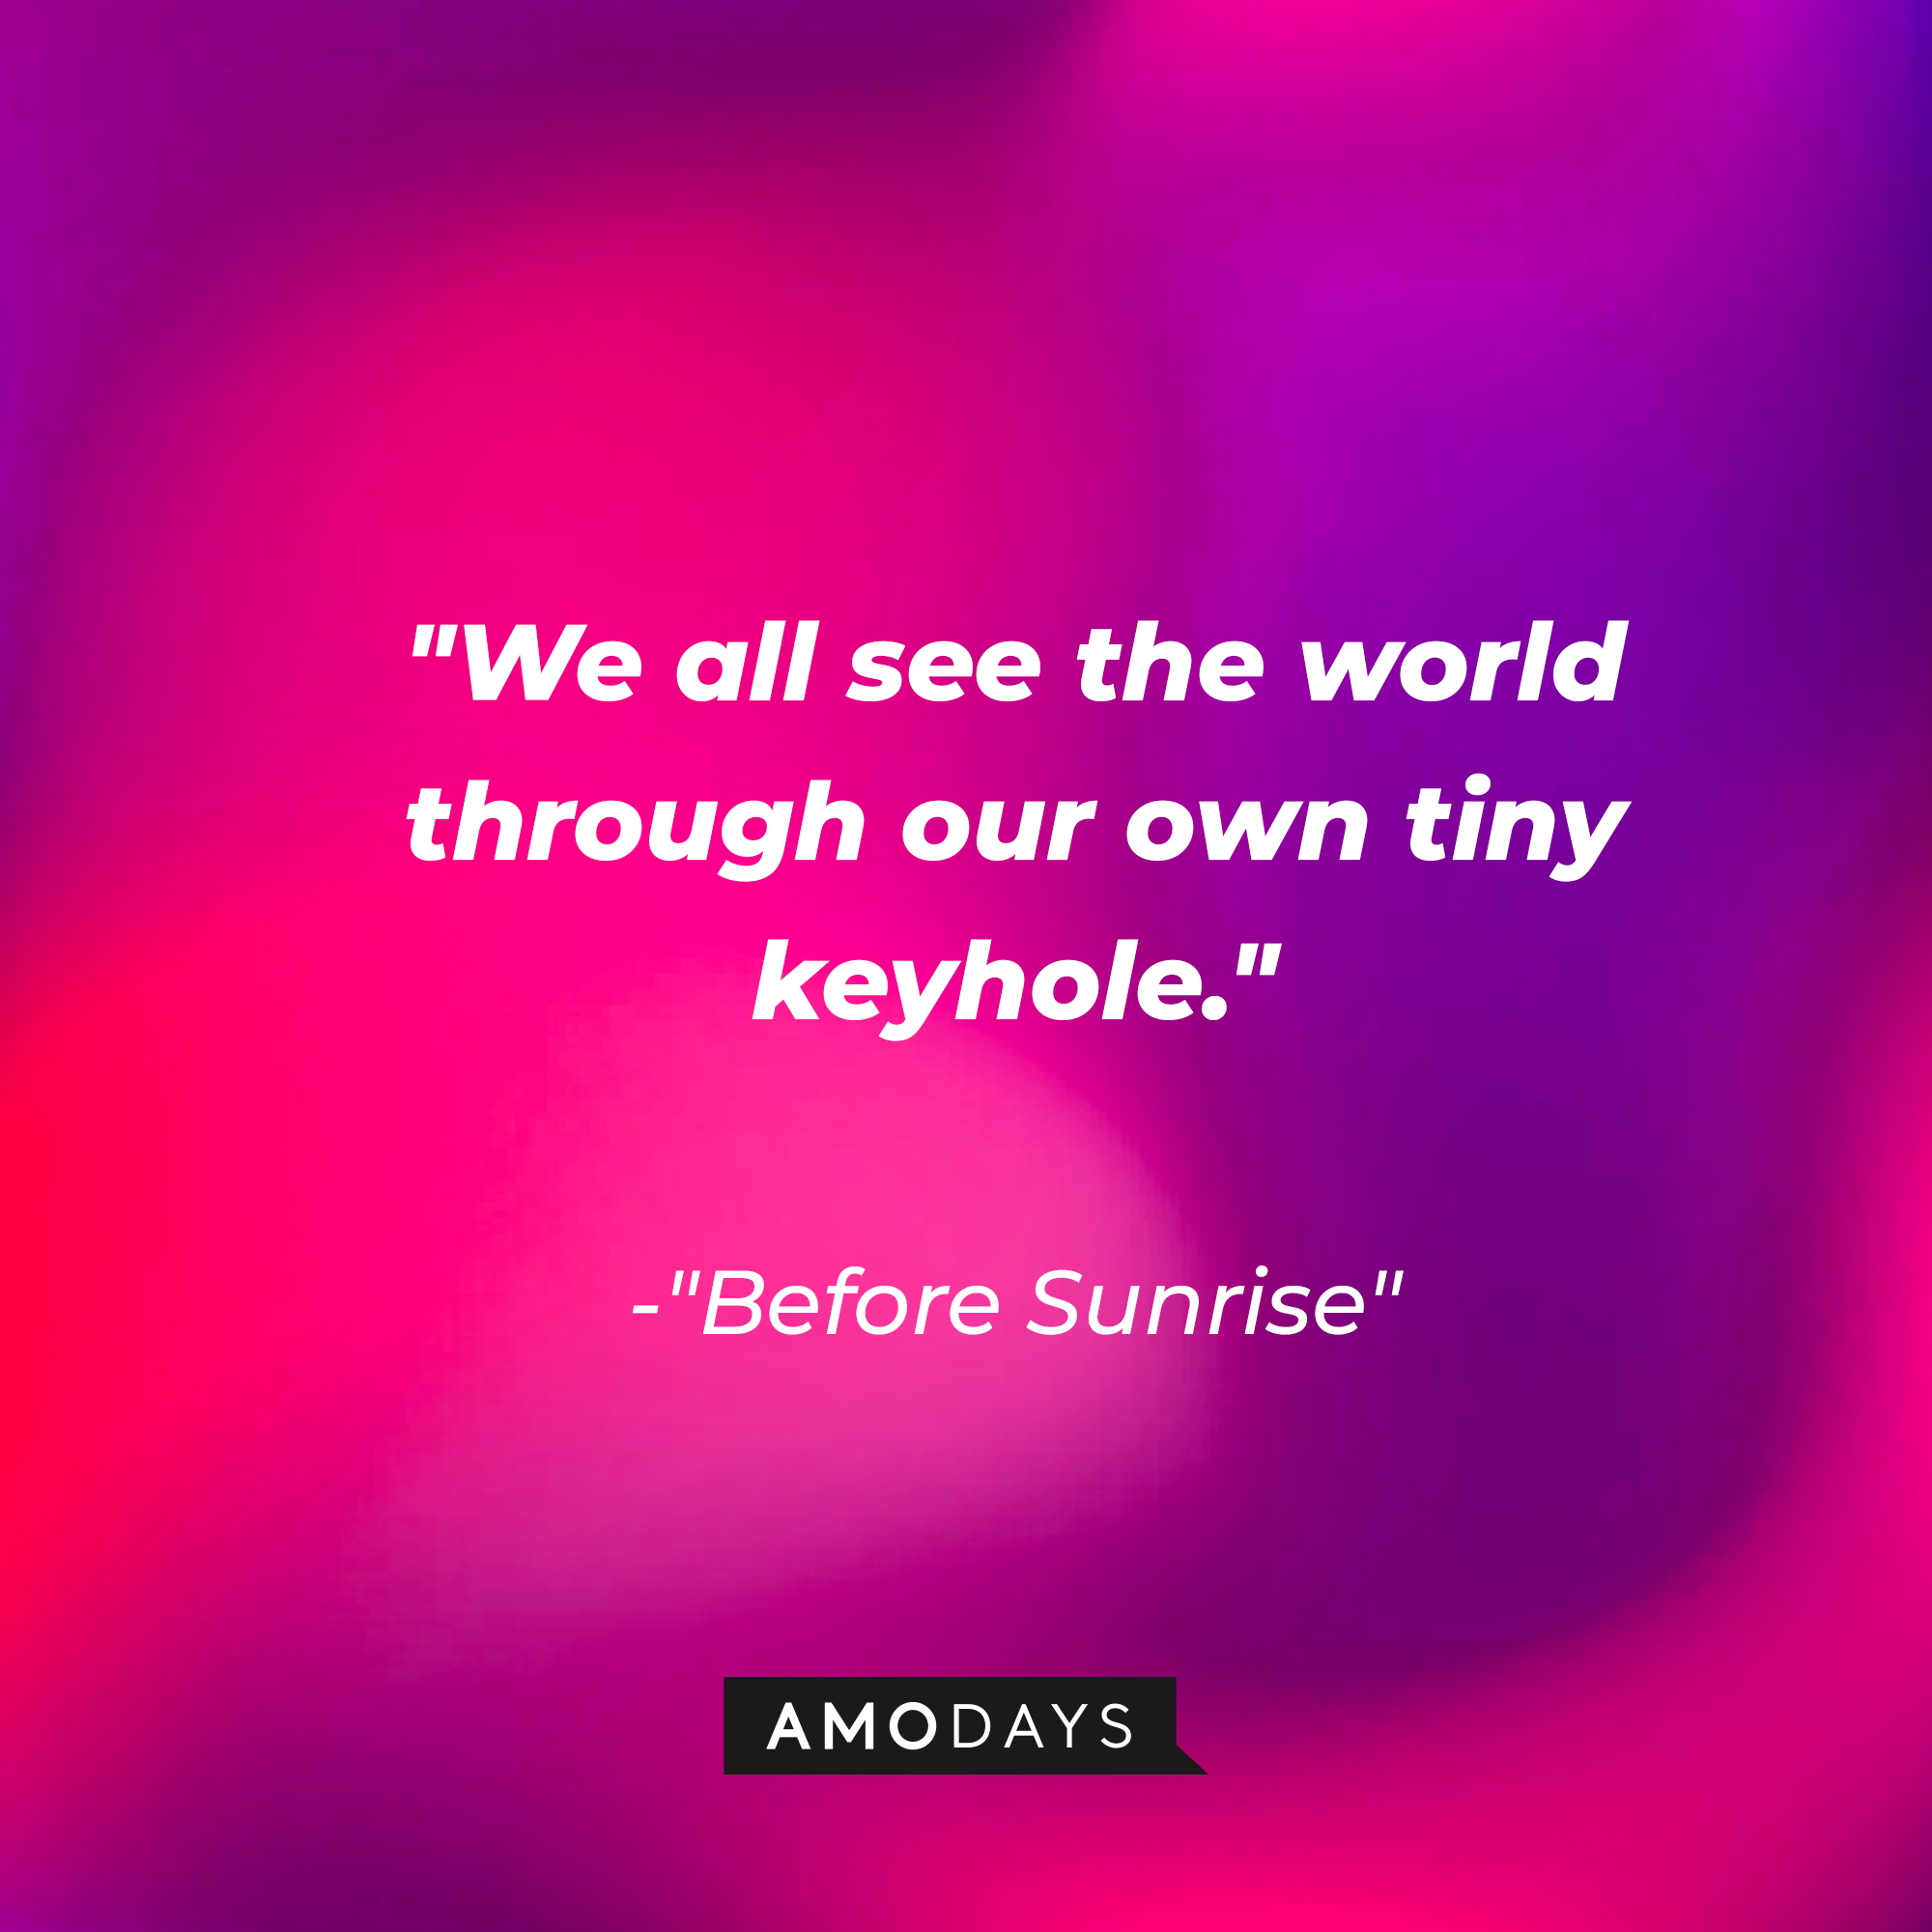 "Before Sunrise" quote: "We all see the world through our own tiny keyhole." | Source: AmoDays